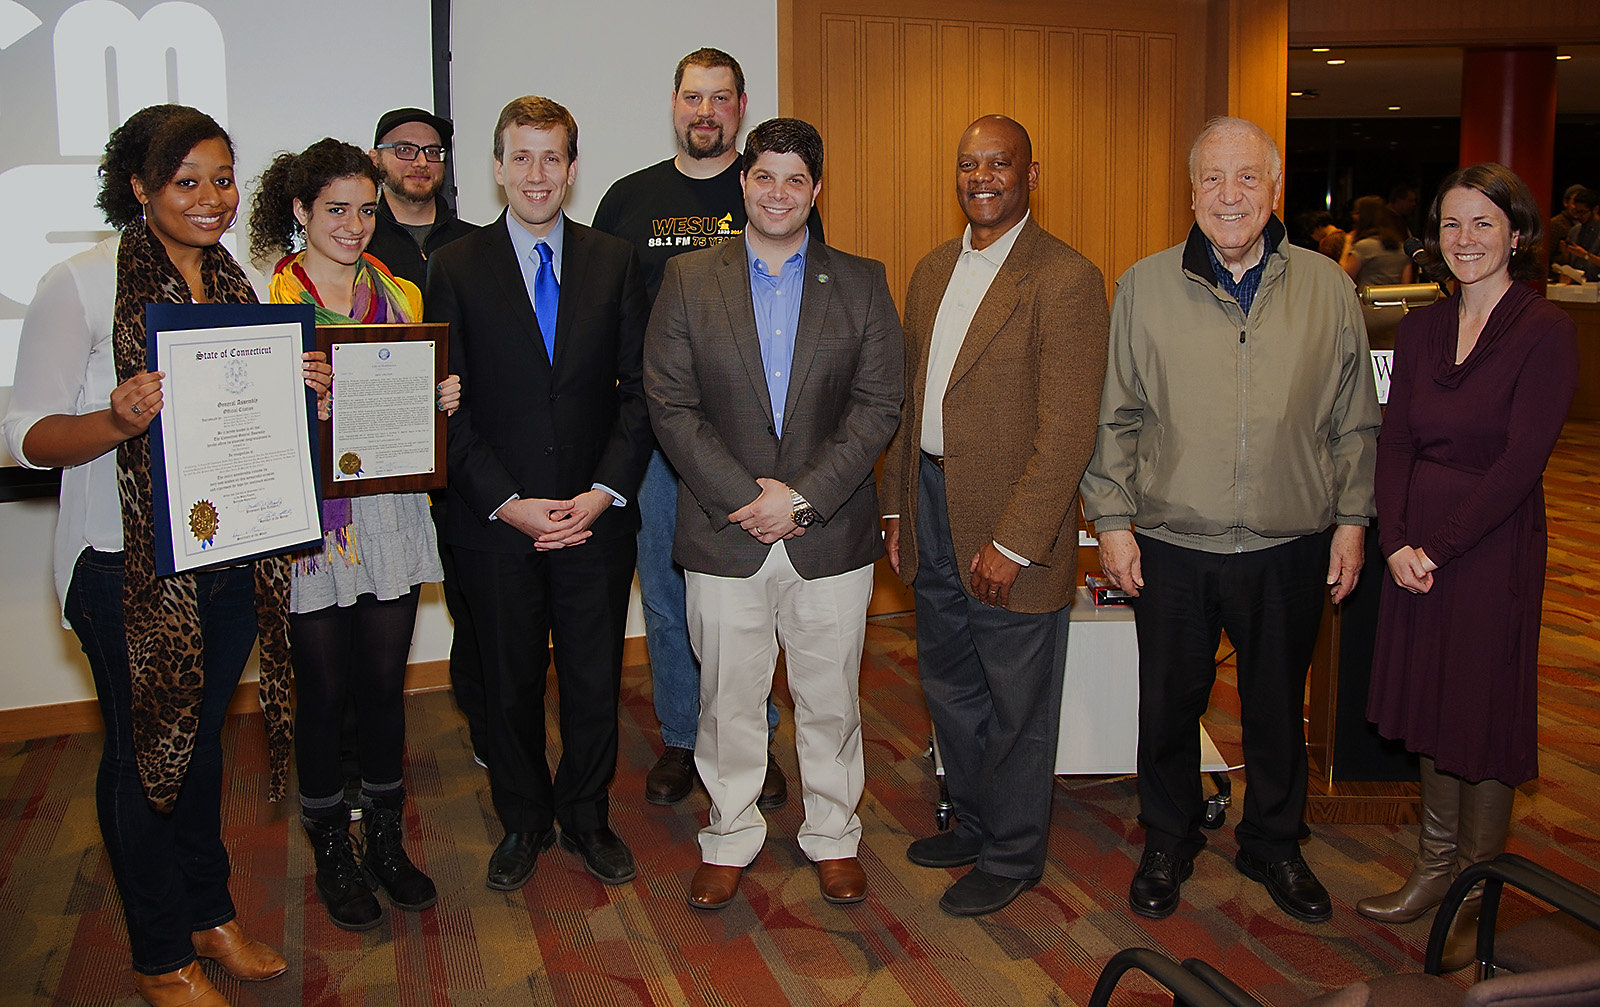 88.1 FM WESU student volunteers and staff celebrated the non-commercial radio station’s 75th anniversary on Nov. 2 with several elected officials. 